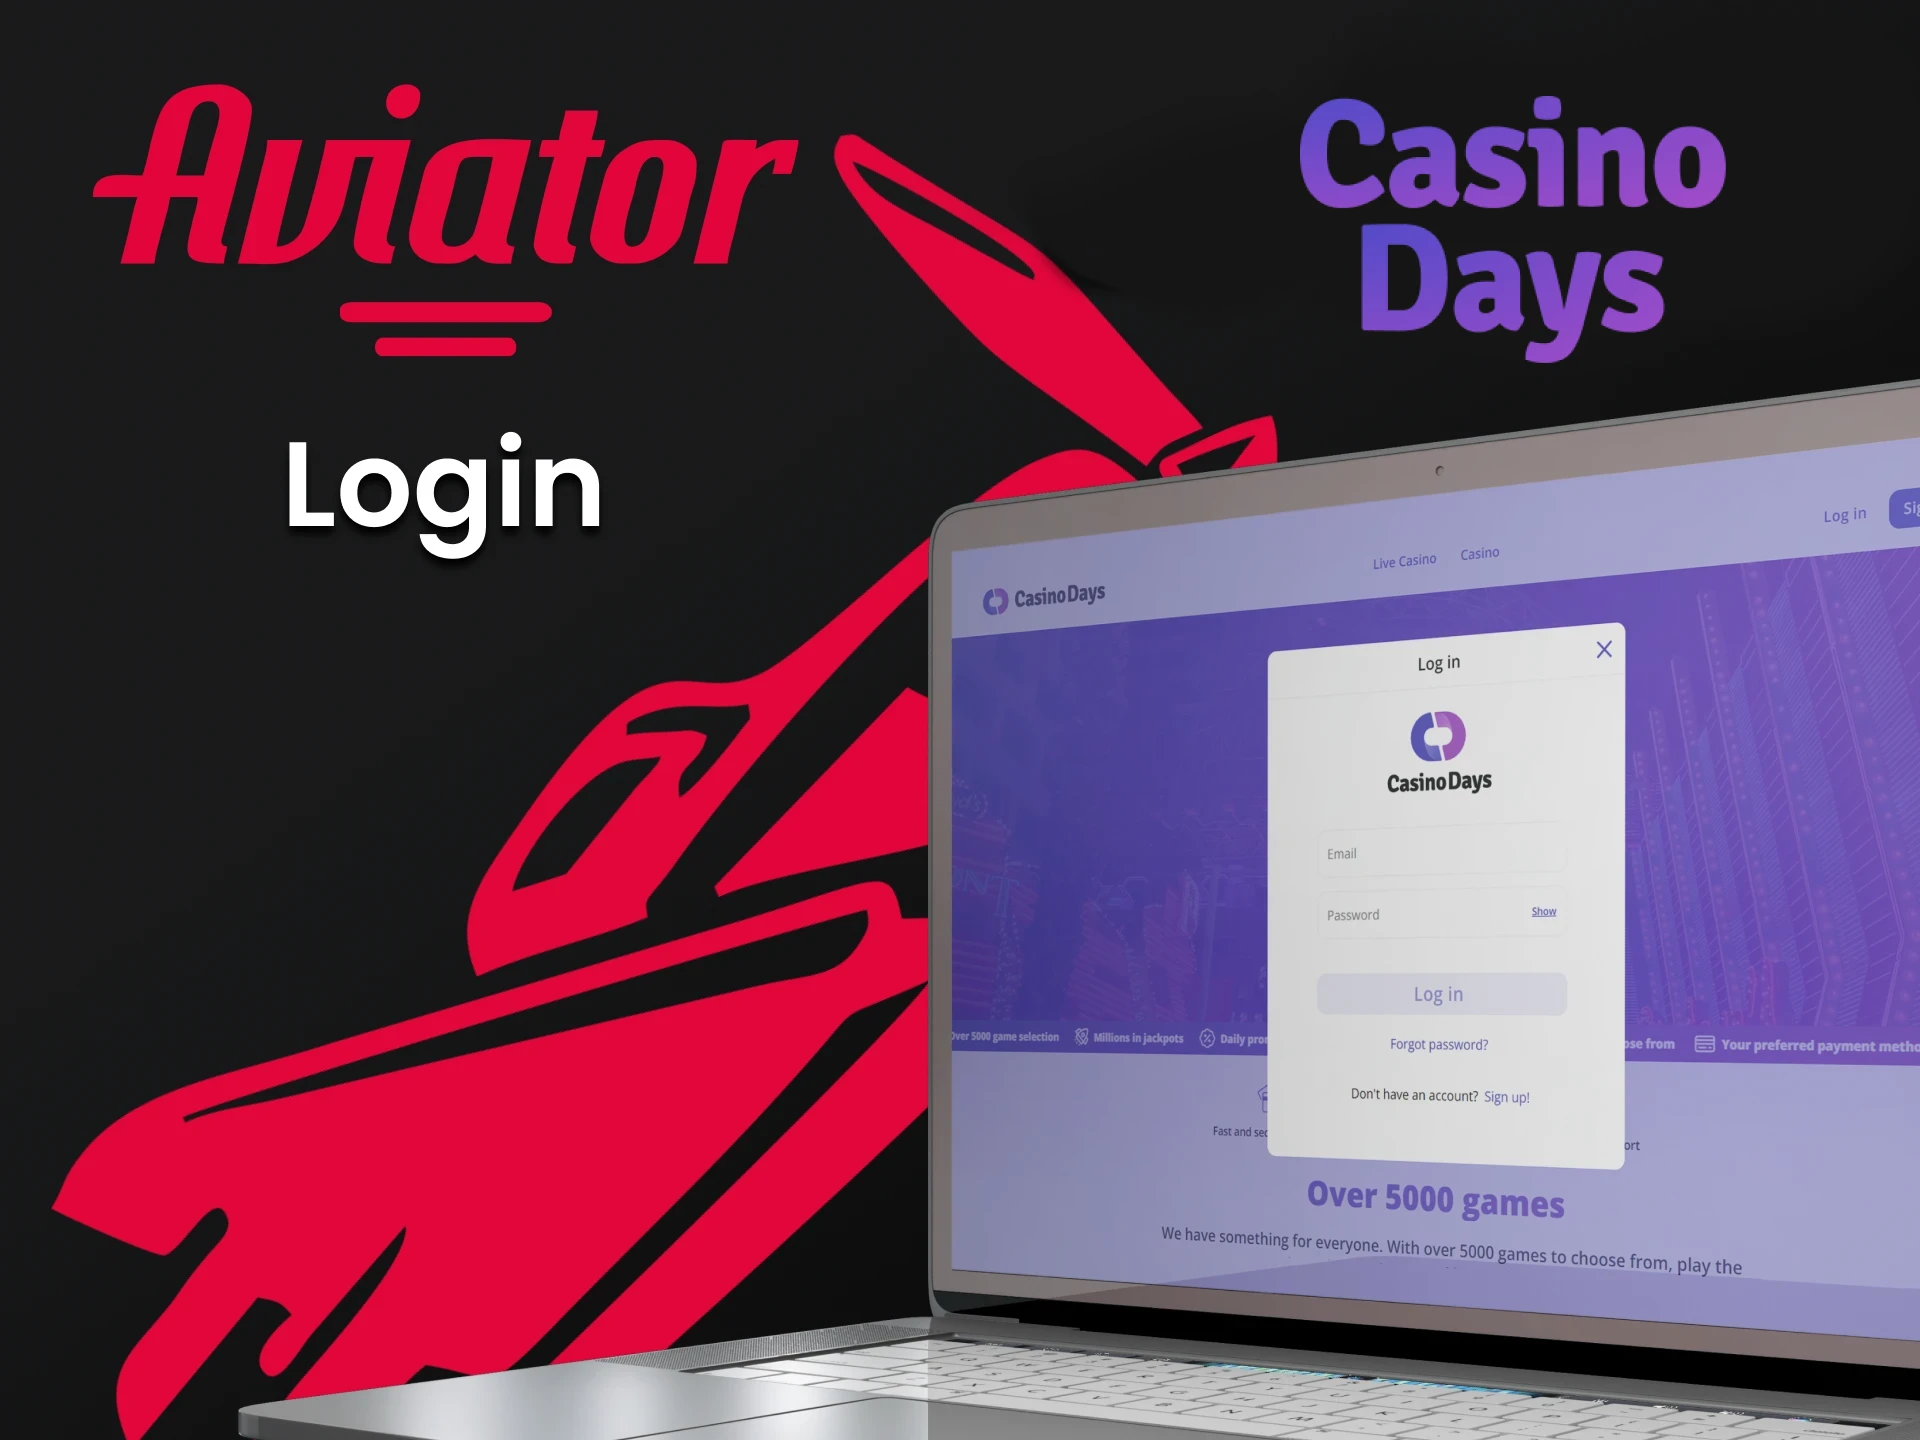 Log in to your personal Casino Days account to play Aviator.